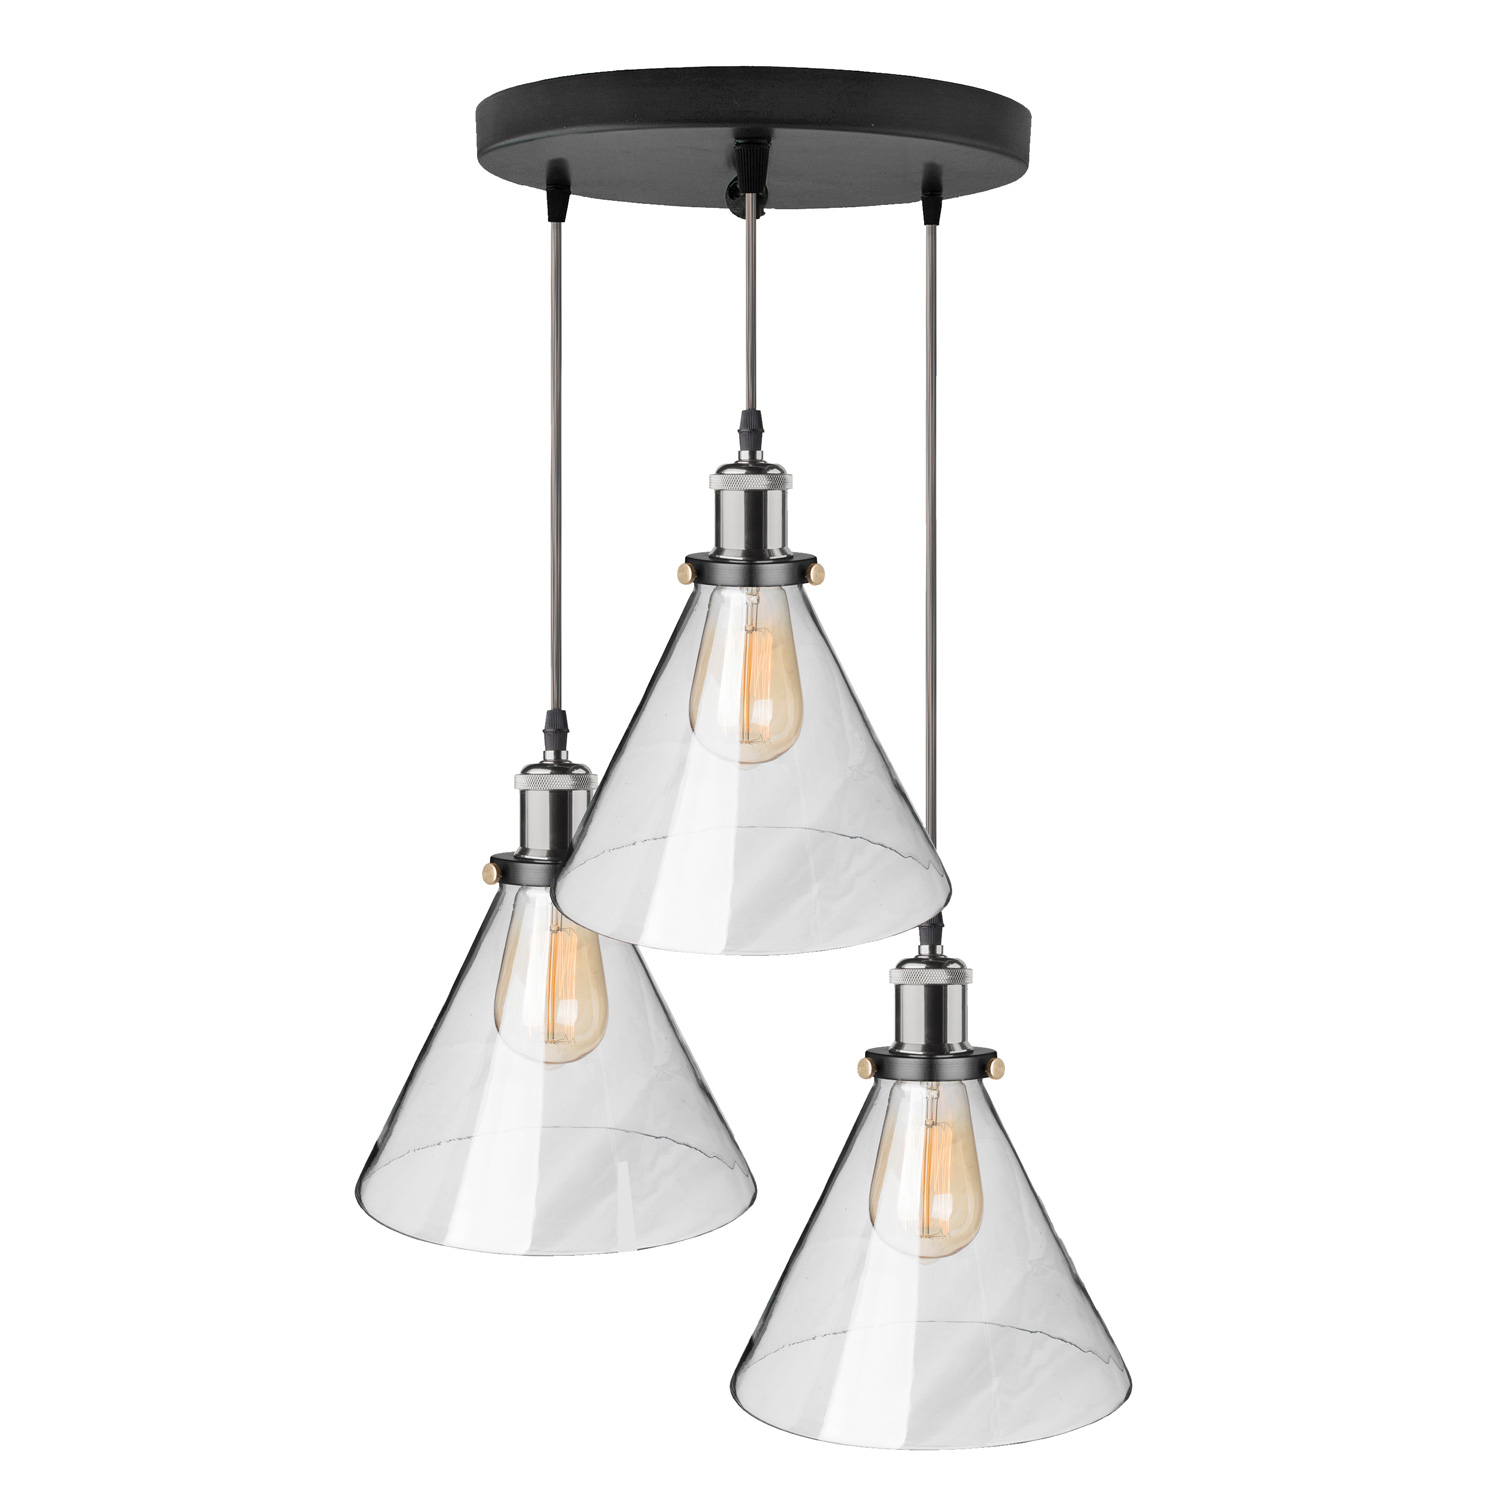 3 Light Modern Glass Cone Shaped With Silver Holder Cluster, Industrial Shade Hanging Light Pendant Ceiling Lamp Isolated